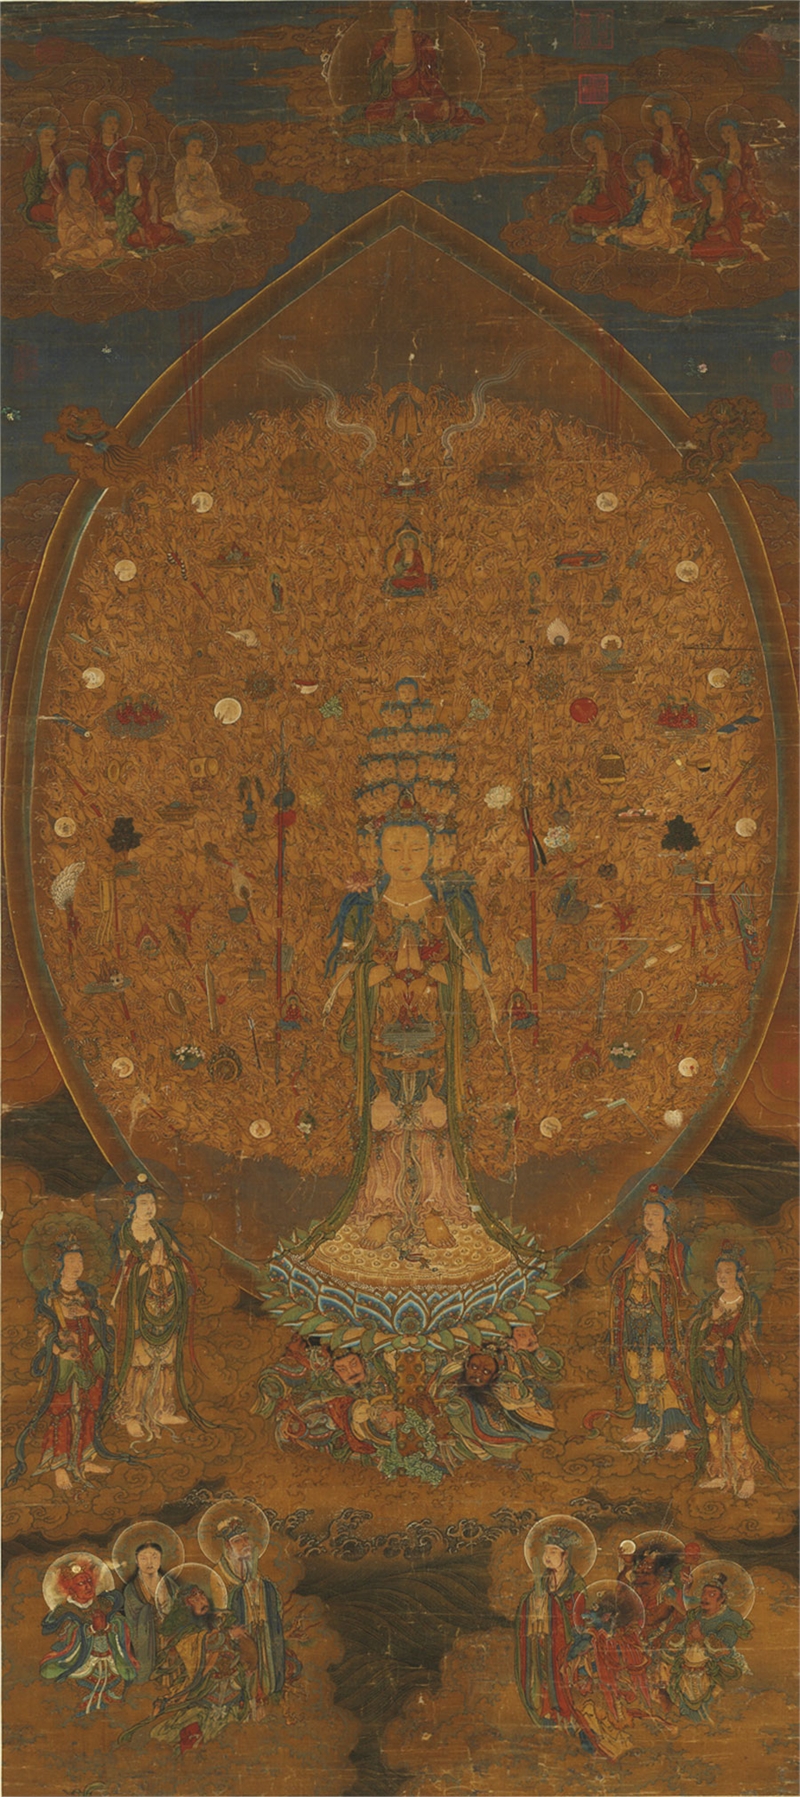 Kuan-yin of a Thousand Arms and Eyes